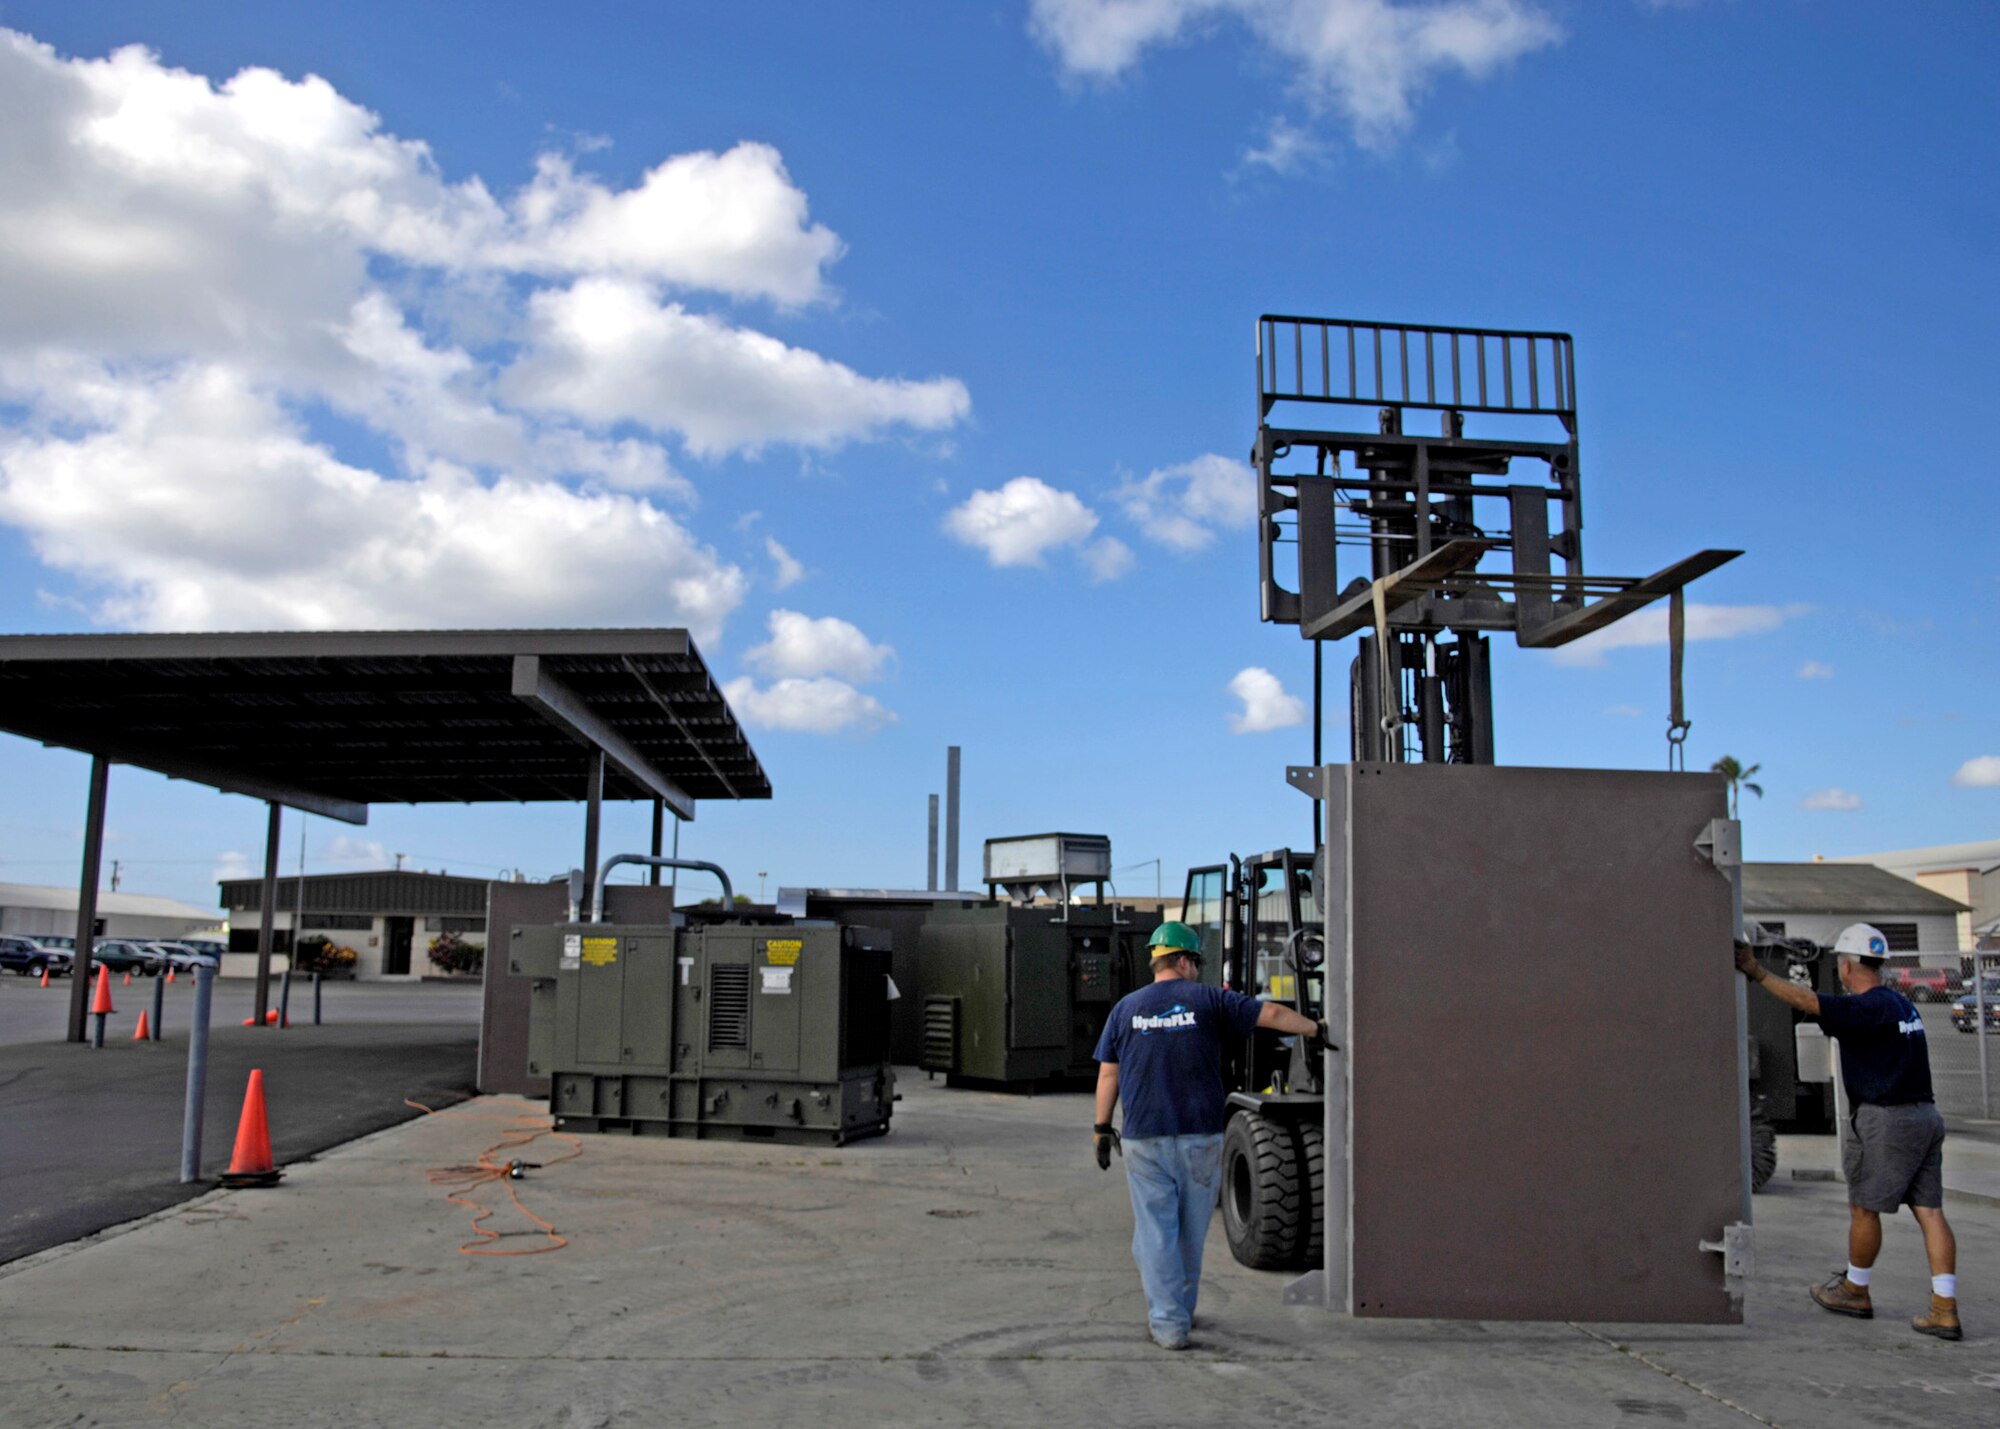 Members of HydraFLX Systems LLC move a containment wall during the building phase for the HydraFLX System at Hickam Air Force Base, Hawaii Oct. 27, 2006. The HydraFLX System is being tested by the Air Force as an alternate energy source. It will generate ultra-pure H2 (hydrogen) from water in a flexible pressure management process for fueling buses, tow-tractors, vans, sedans and ground support equipment. The system can also be deployed anywhere and operate in hostile theaters without infrastructure or pipelines. (U.S. Air Force photo/Tech. Sgt. Shane A. Cuomo)
